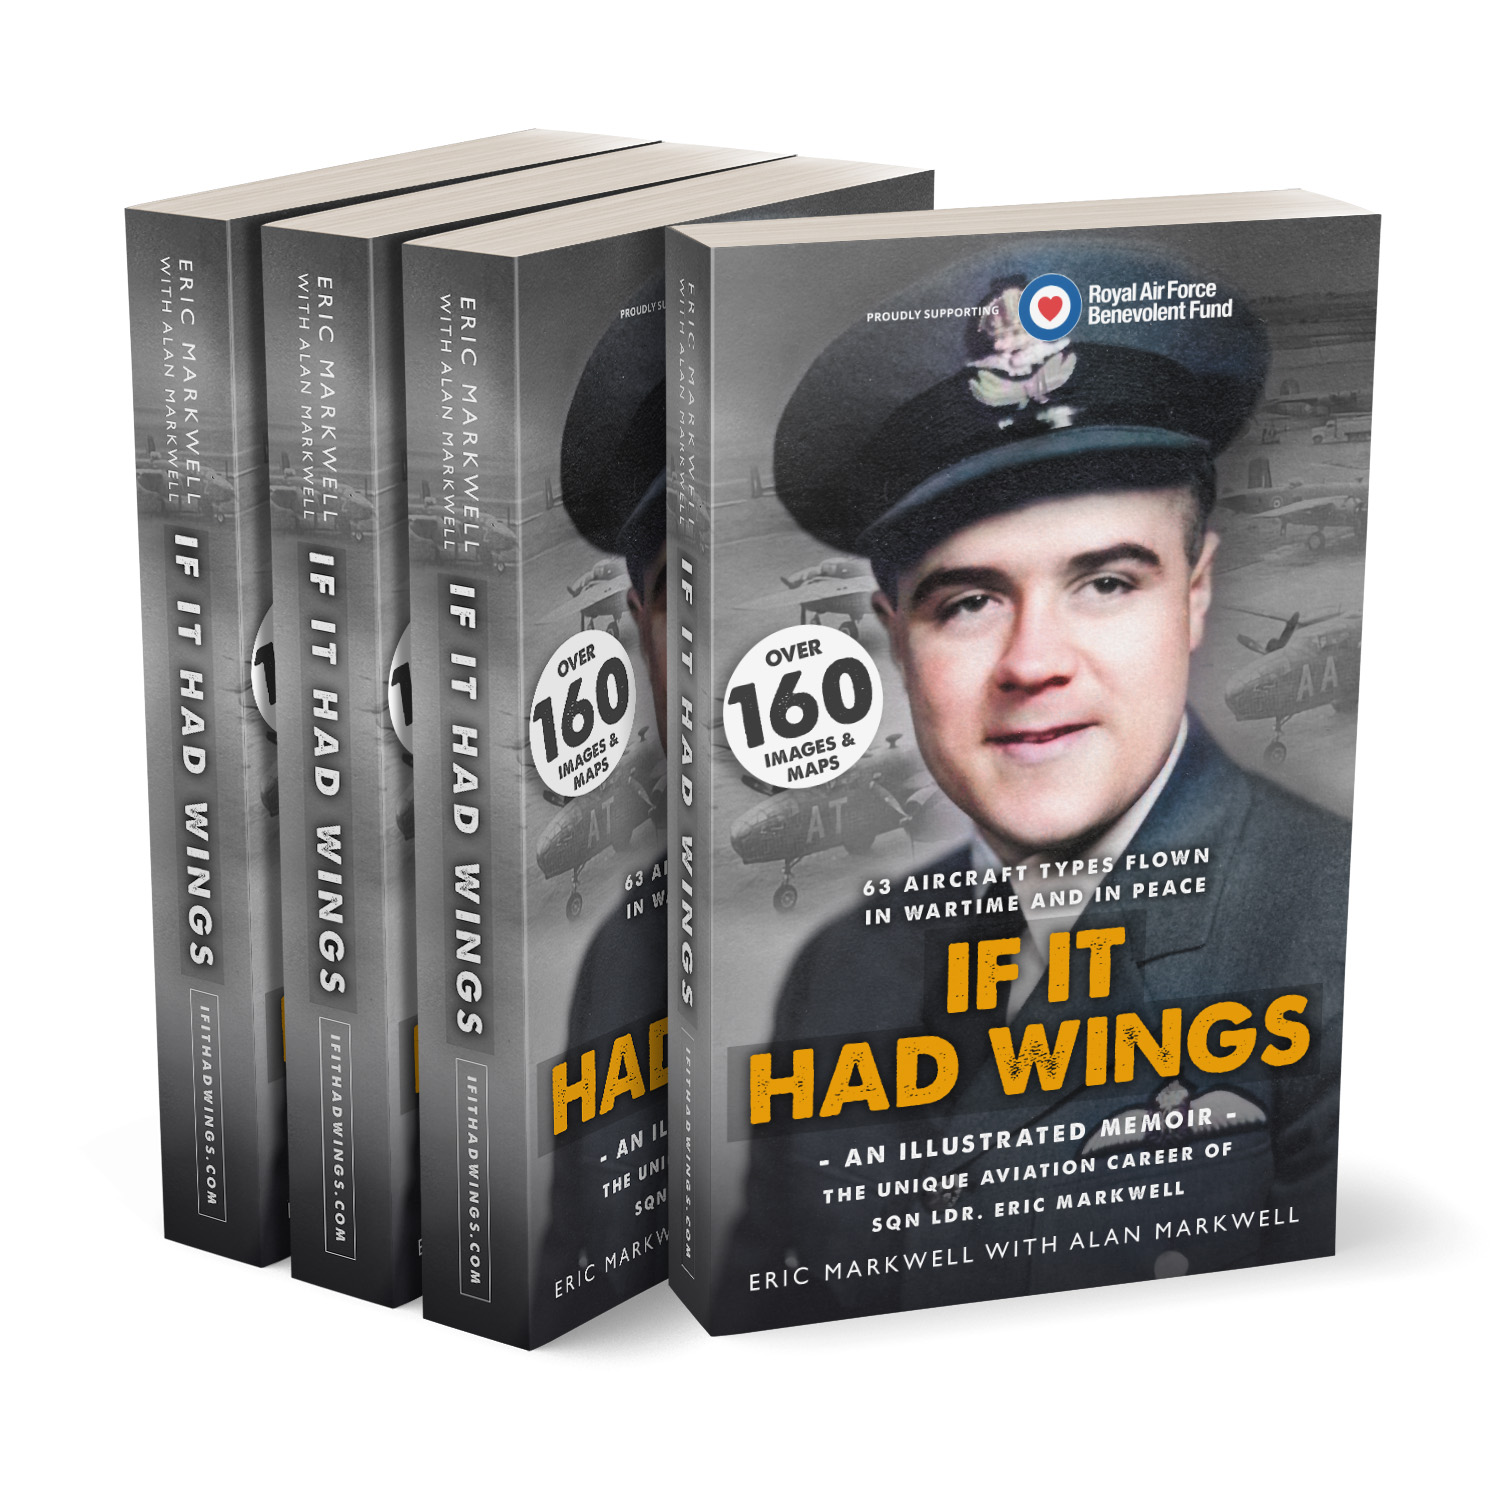 'If It Had Wings' is a unique illustrated memoir of a pilot, both in wartime and peace. The authors are Eric and Alan Markwell. The book cover design and interior formatting are by Mark Thomas. To learn more about what Mark could do for your book, please visit coverness.com.